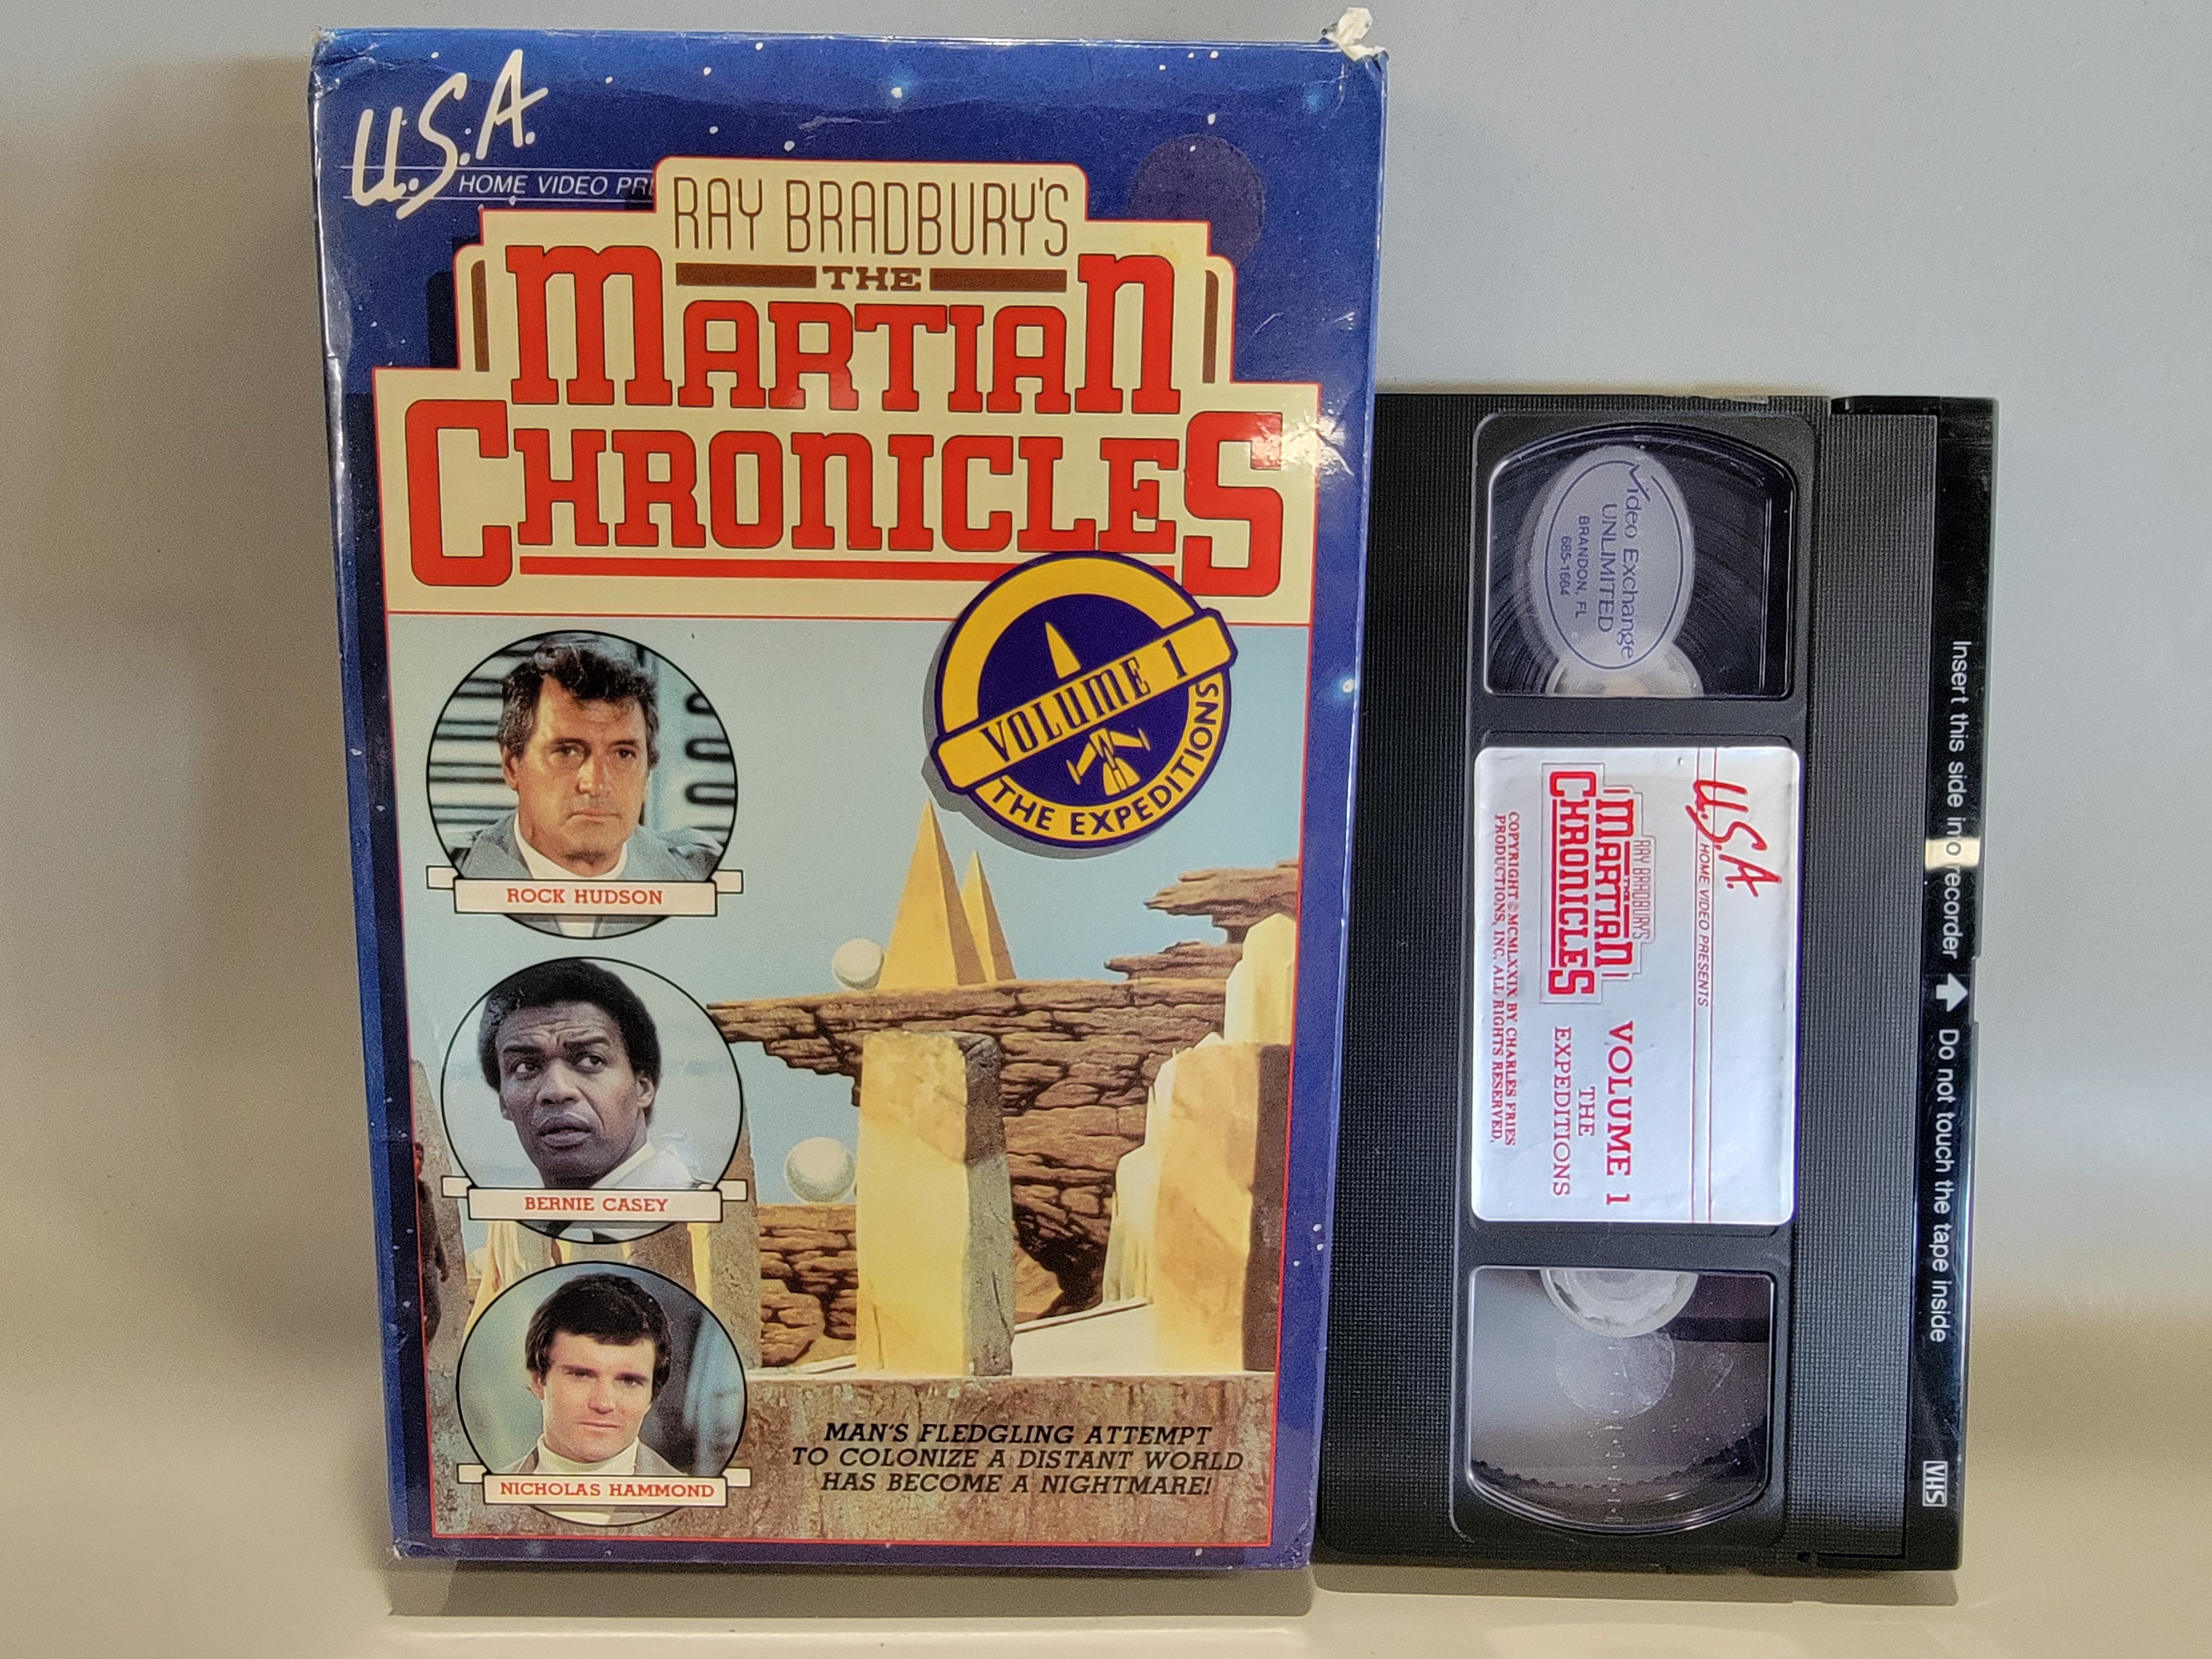 THE MARTIAN CHRONICLES VOLUME 1: THE EXPEDITIONS VHS [USED]